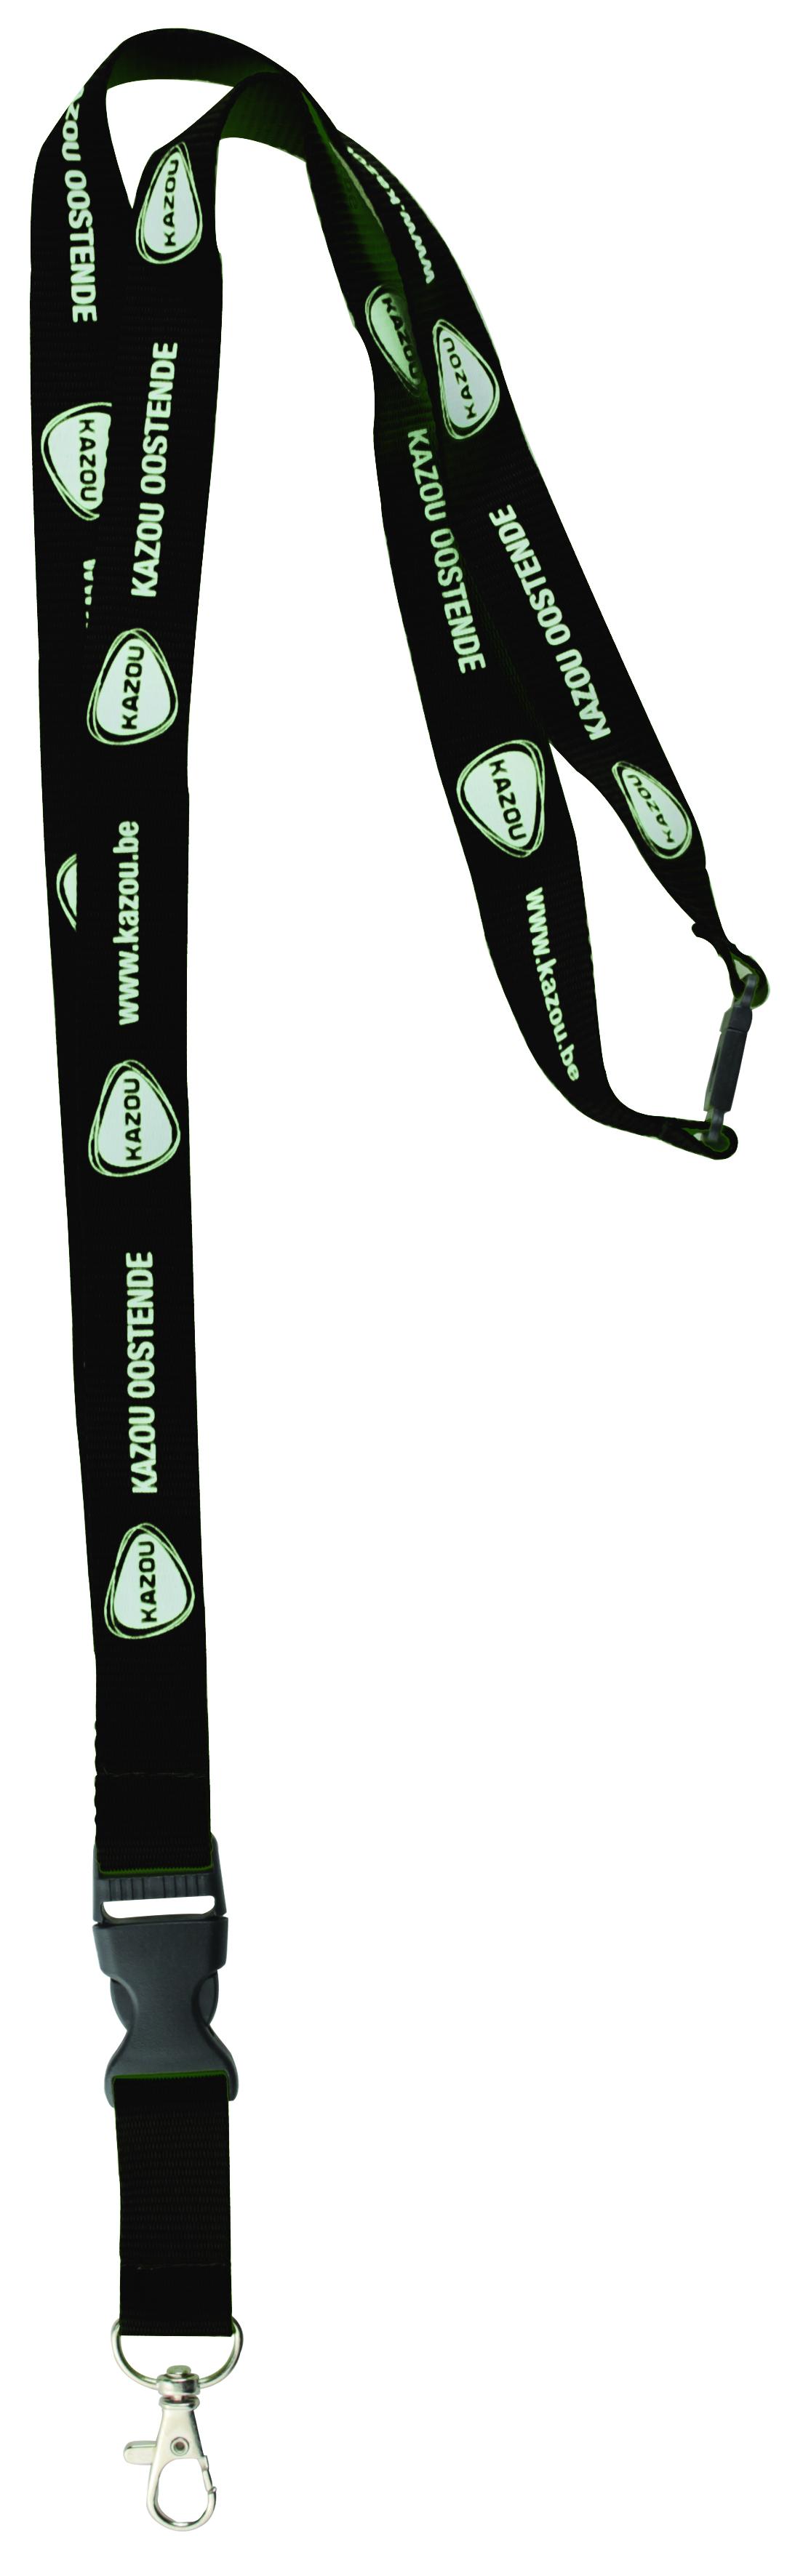 15mm Lanyard with Release Buckle and Safety Breakaway